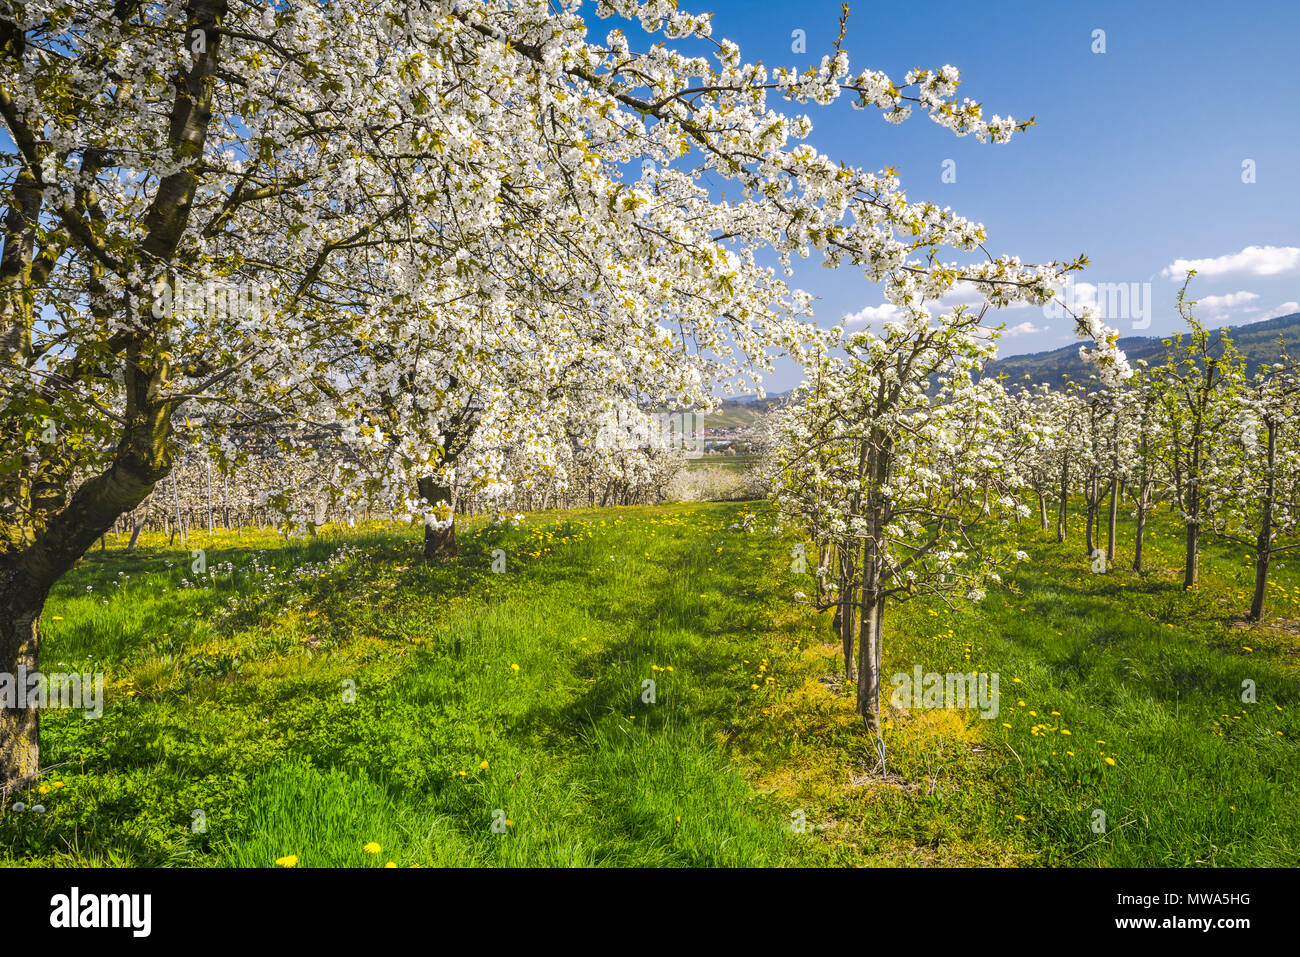 orchard with blooming cherry trees, near Oberkirch, Germany, cultural landscape at the foothills of the Black Forest at springtime Stock Photo